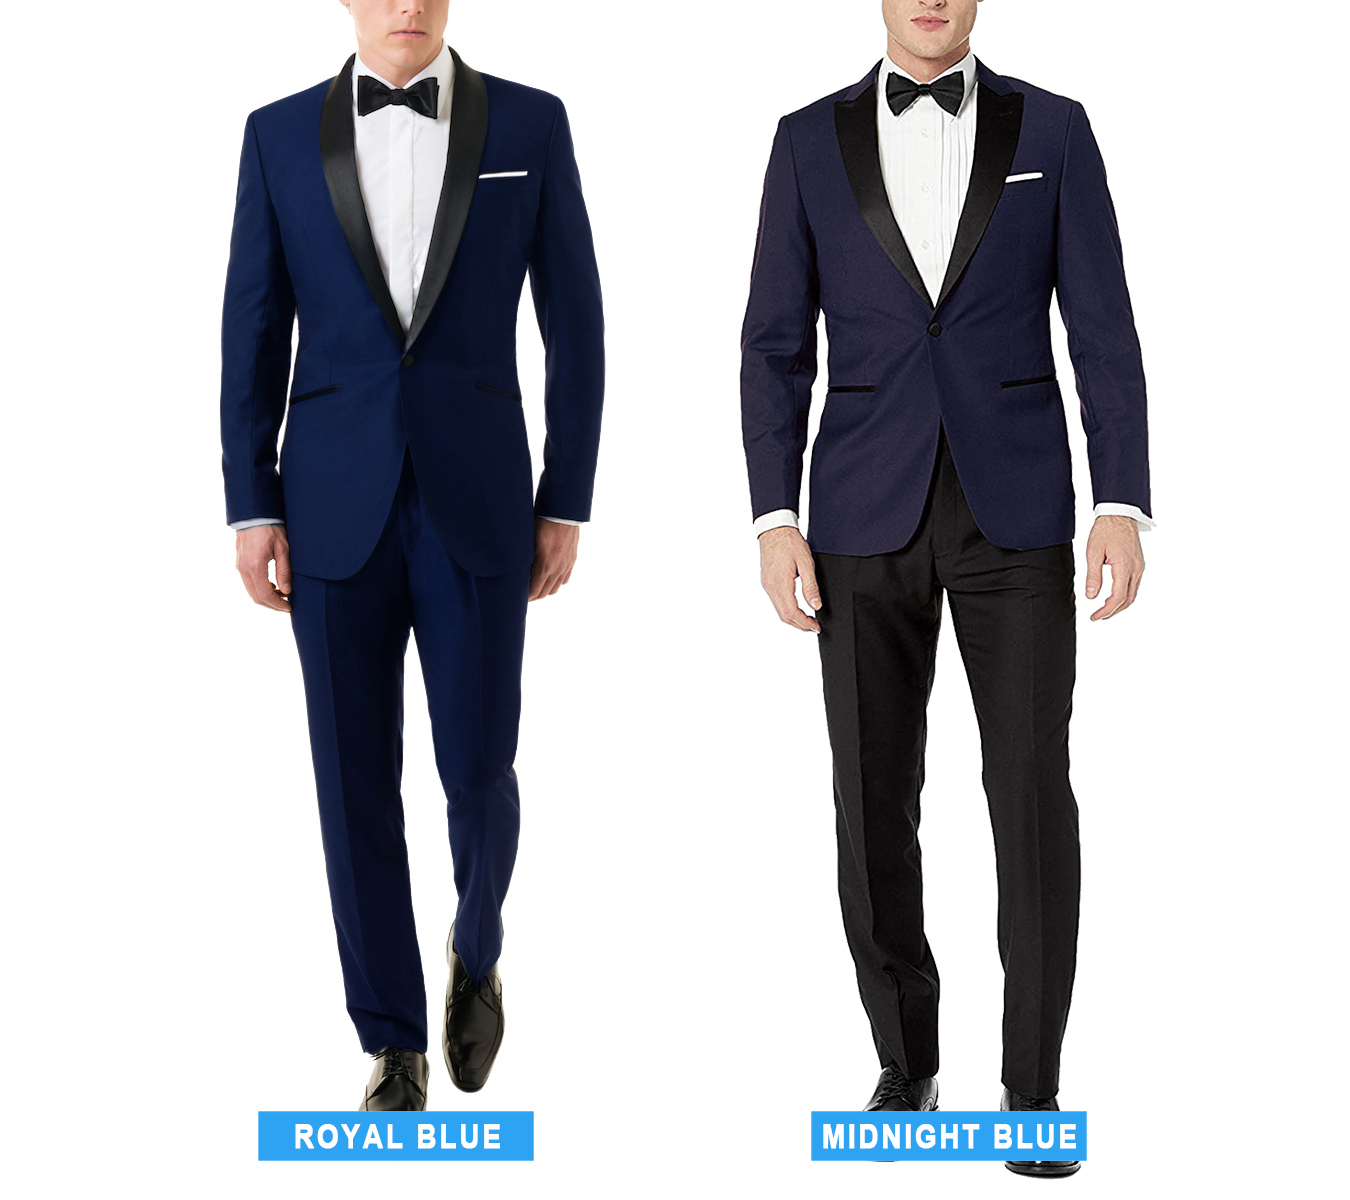 Navy Blue Tuxedo Jacket With Black Pants | peacecommission.kdsg.gov.ng